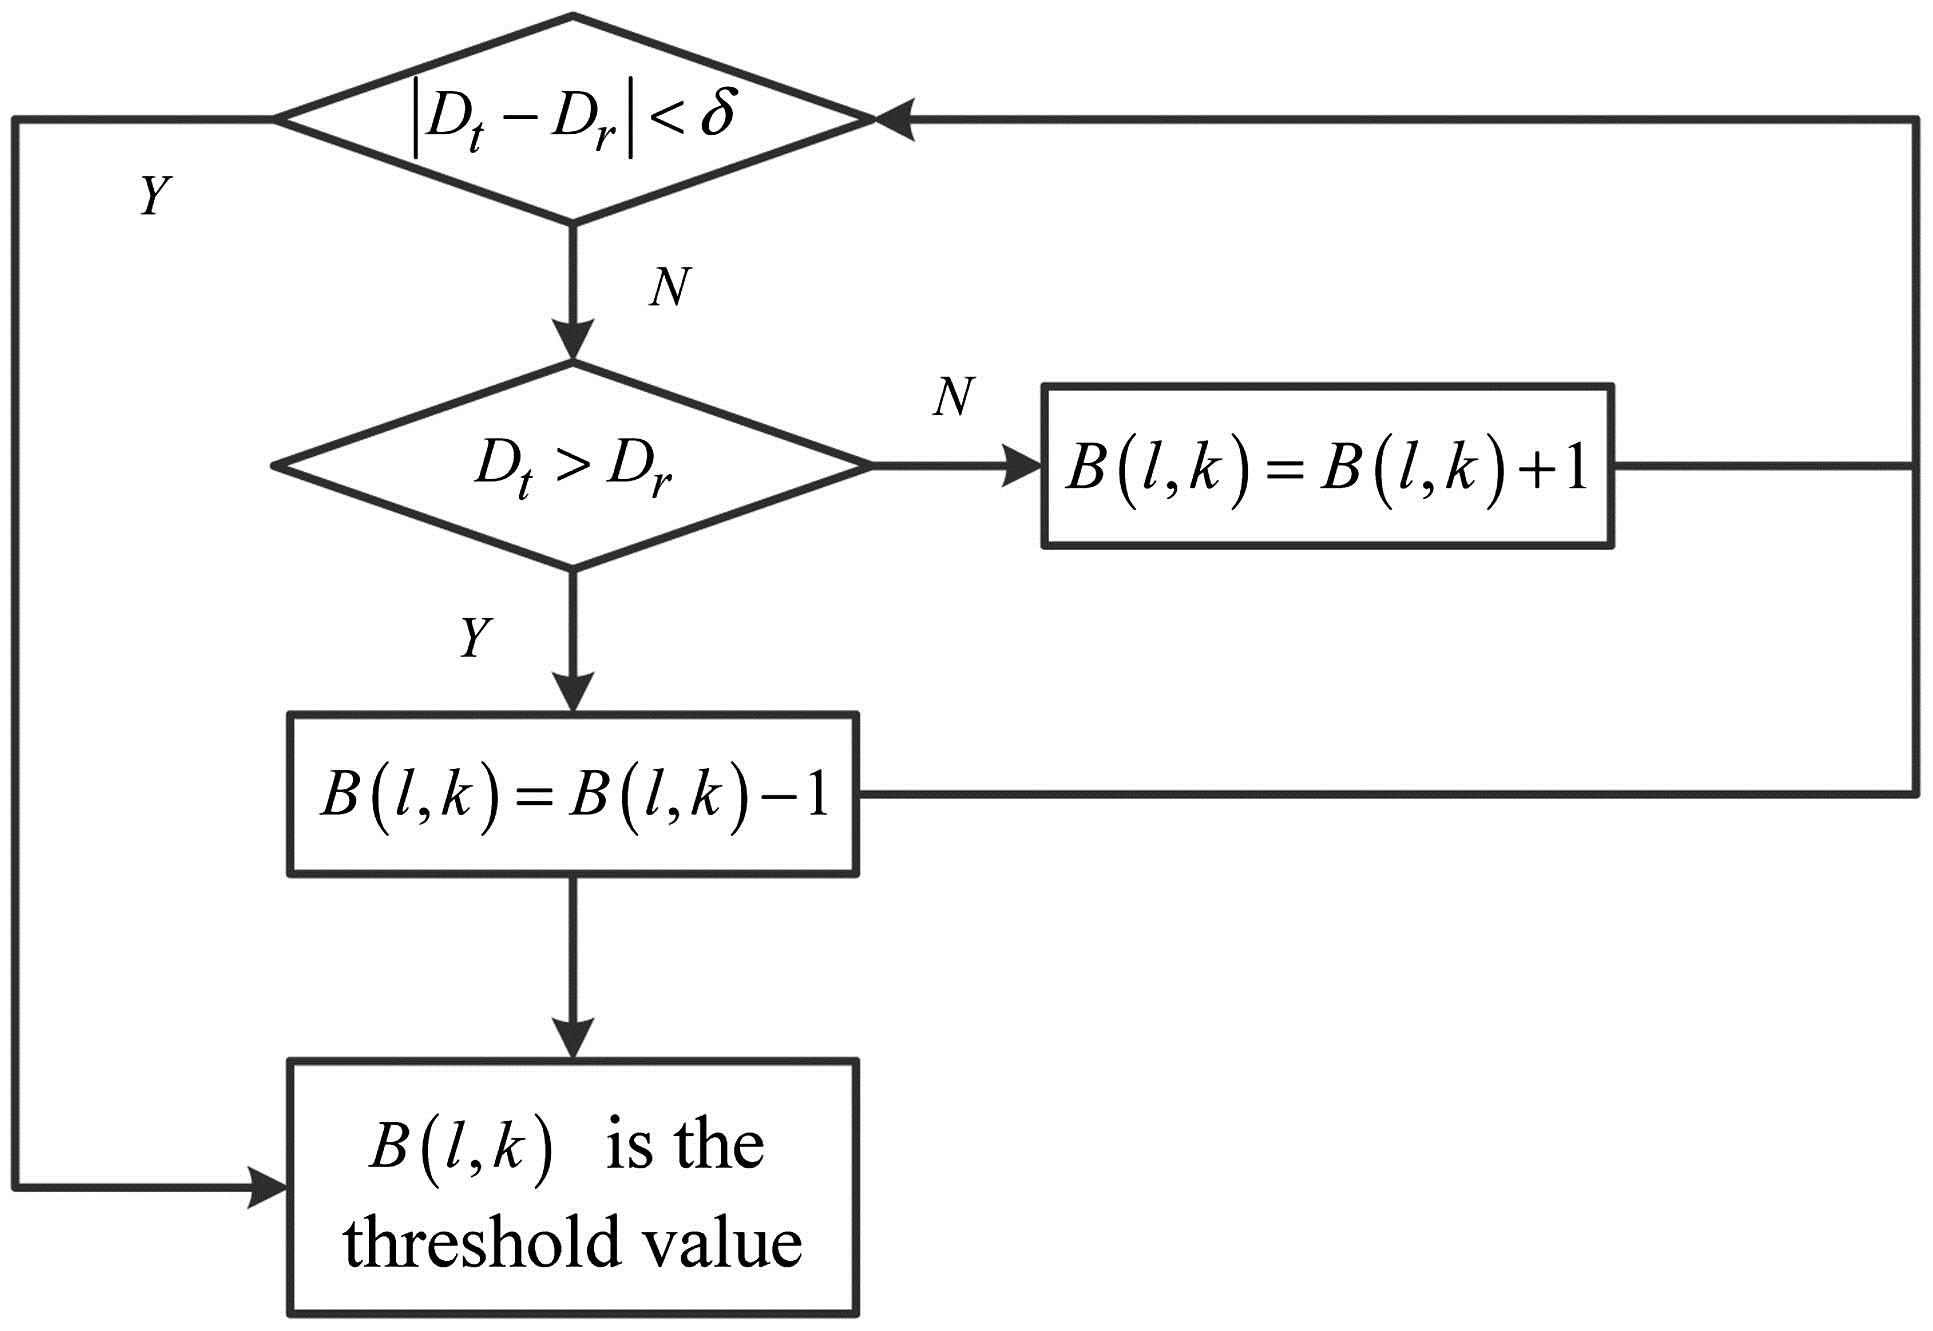 Flow chart for the threshold value calculation.